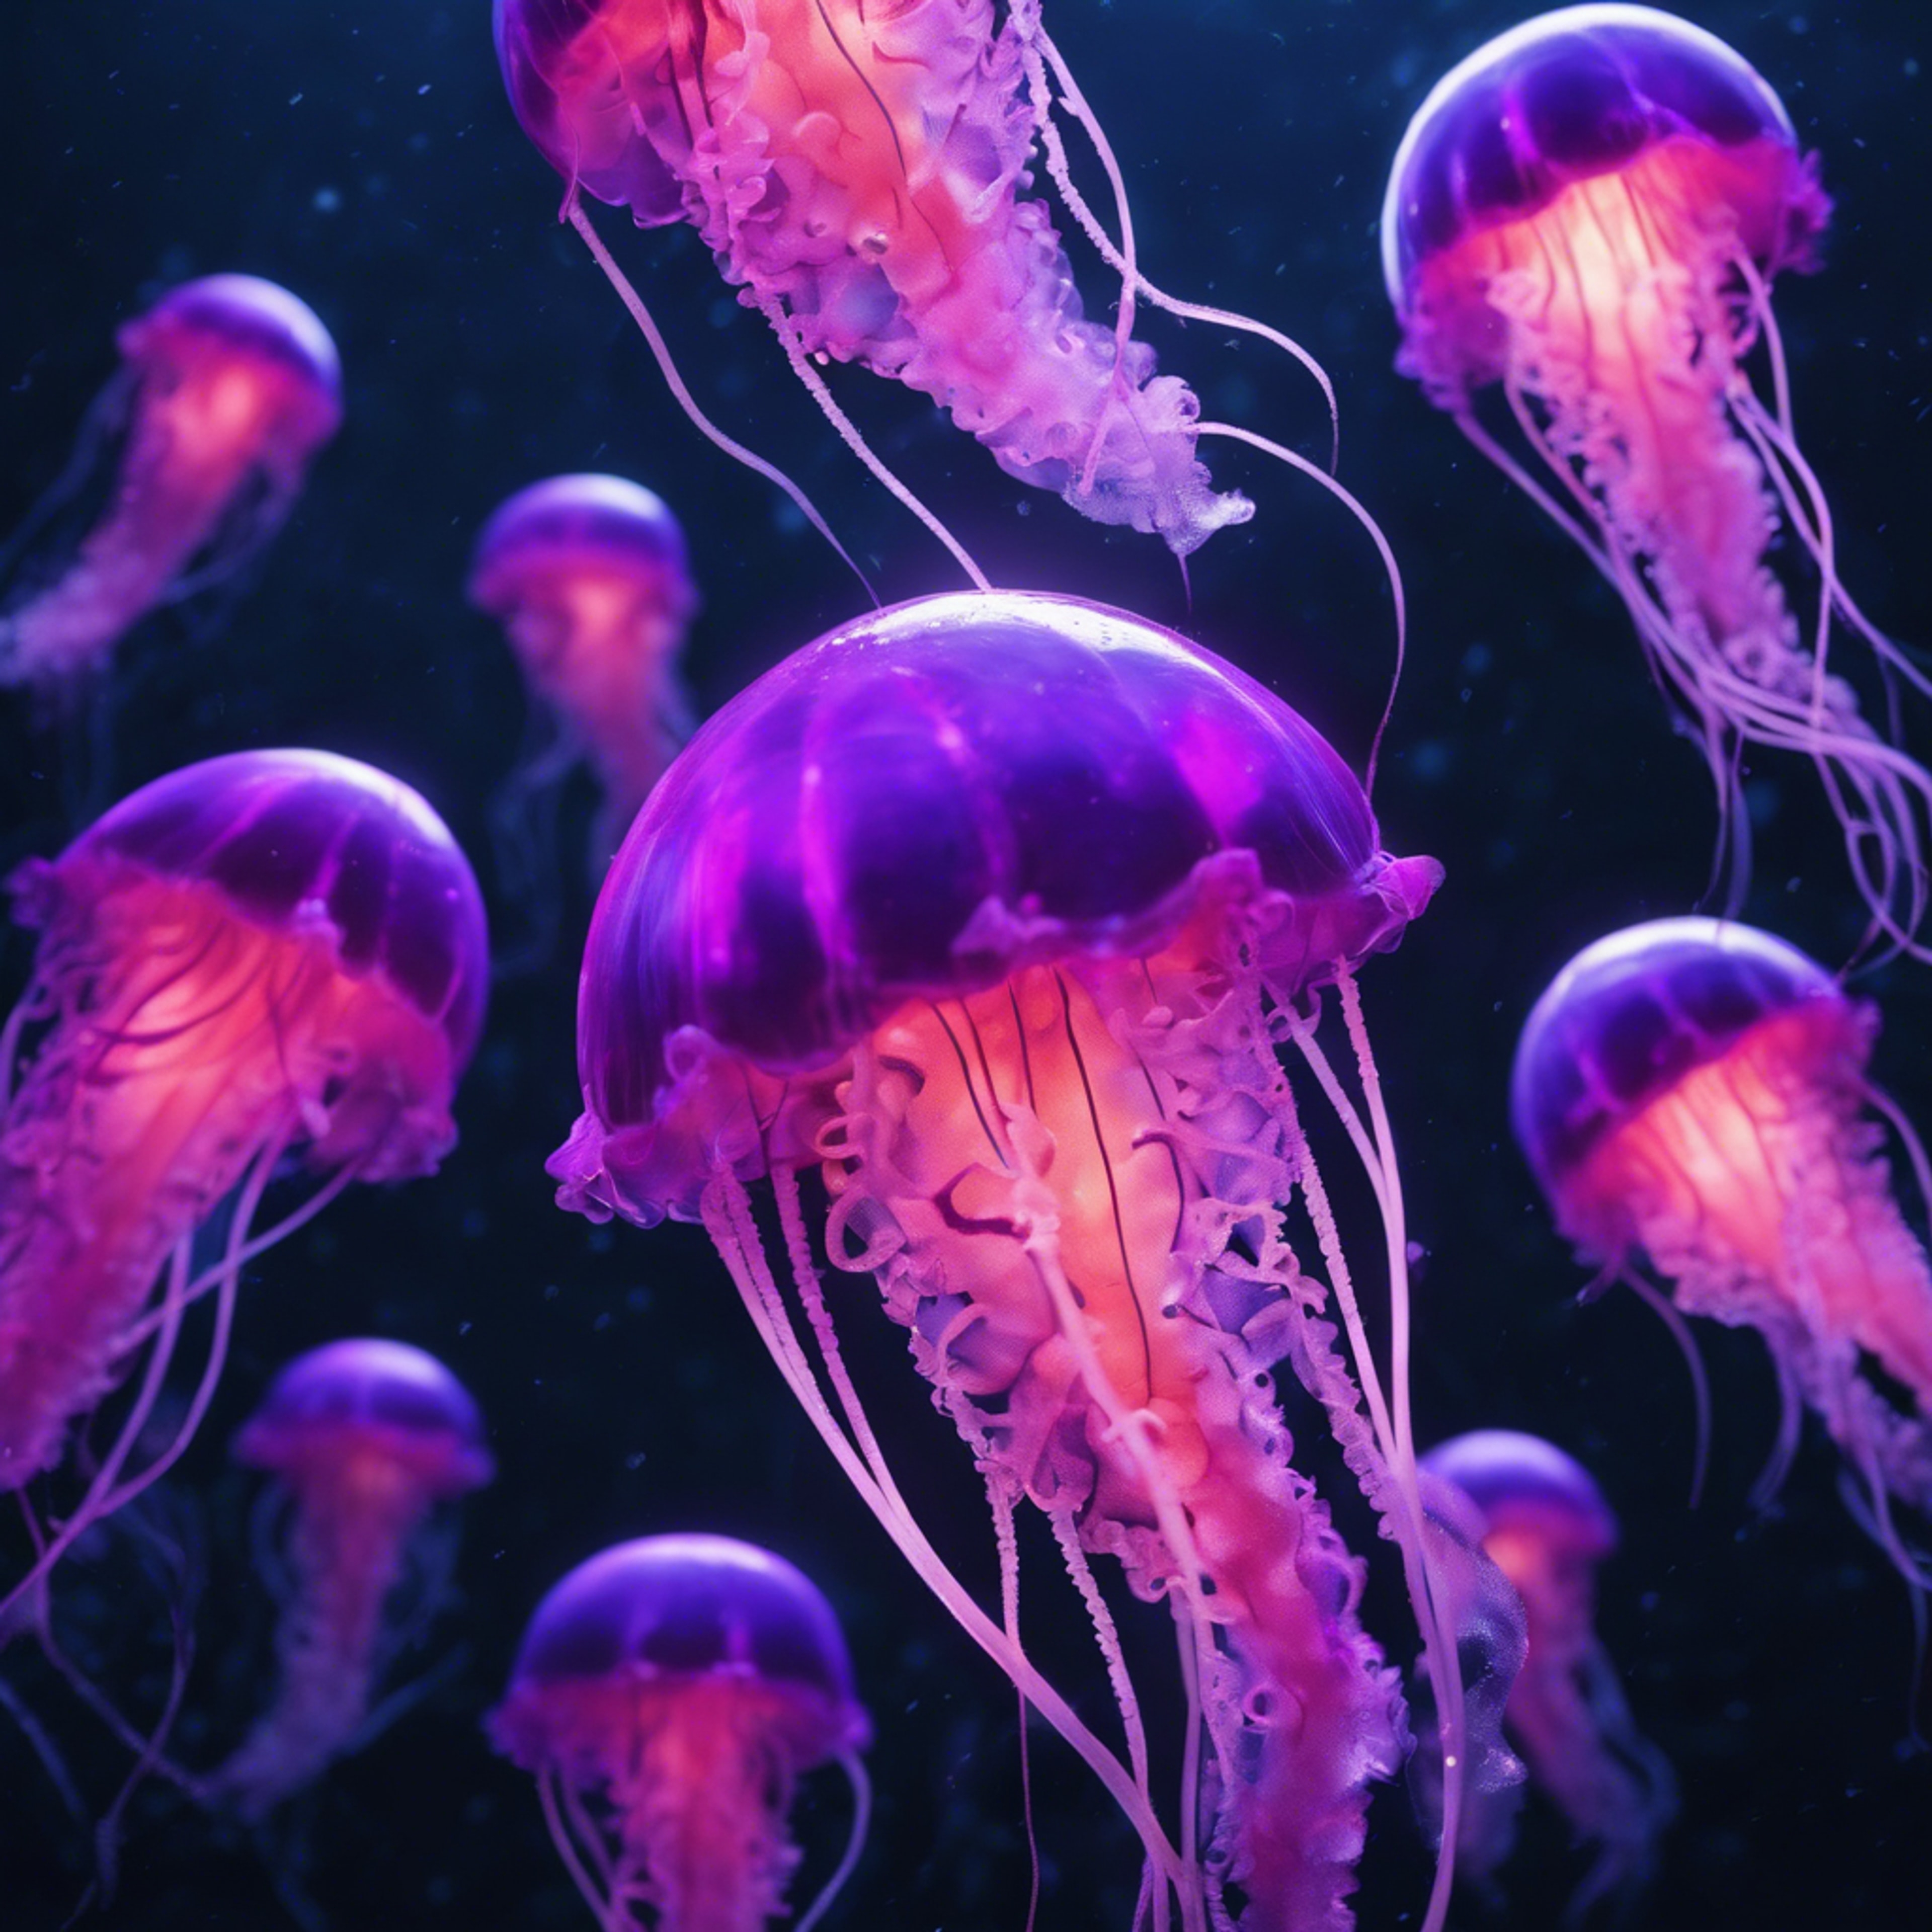 An array of neon purple jellyfish gracefully floating in the cool, dark depths of the ocean. 벽지[2e15e39636af455f837d]